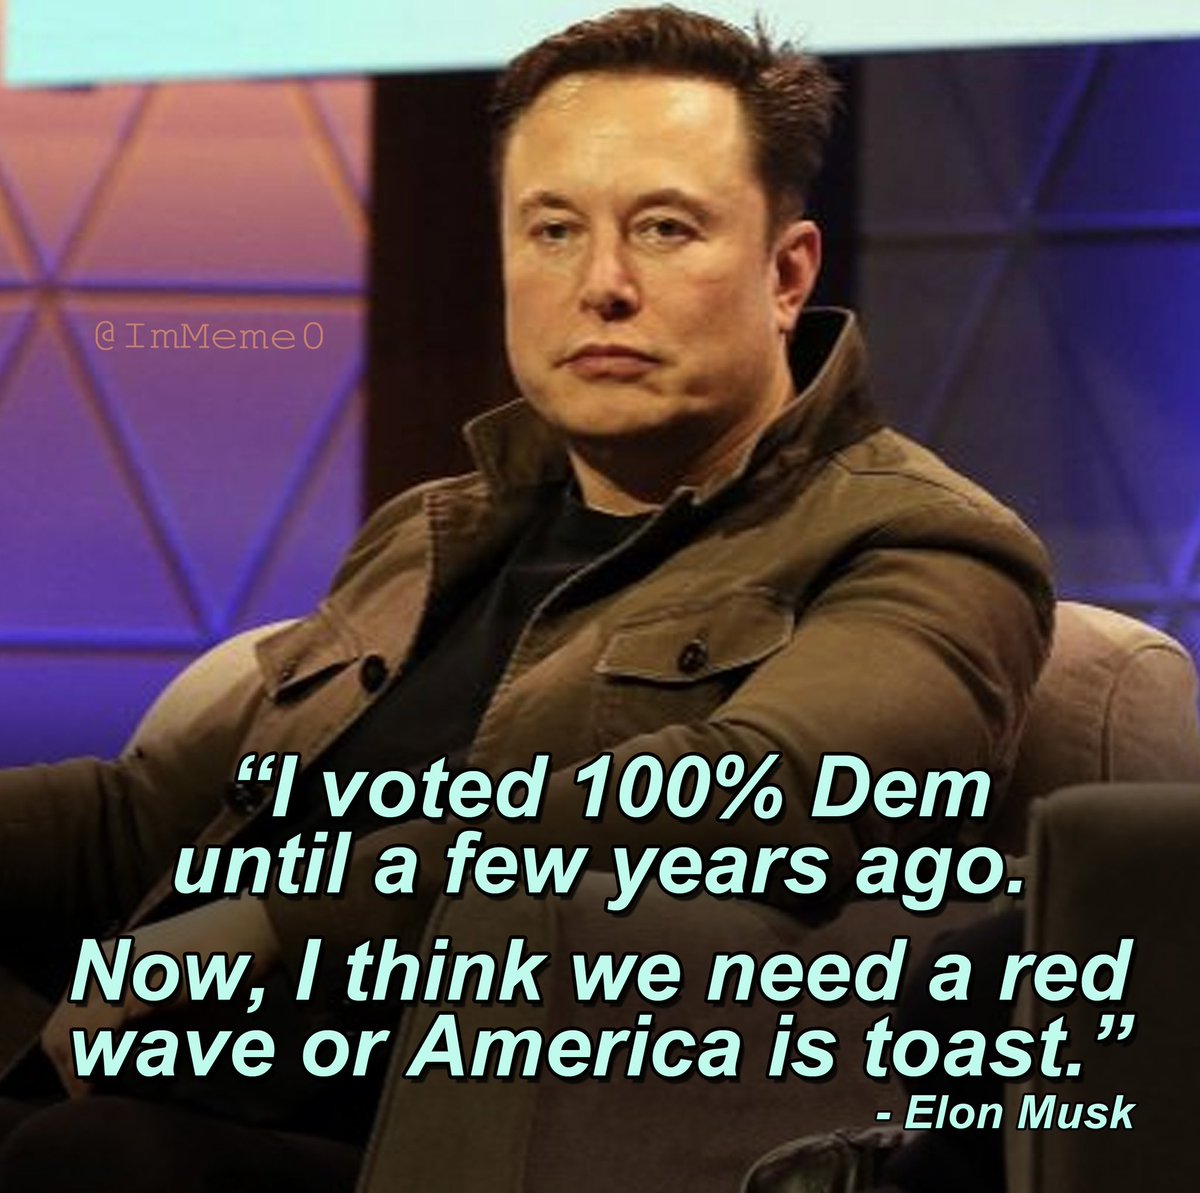 Do you agree with Elon Musk? Please RT for wider spread.